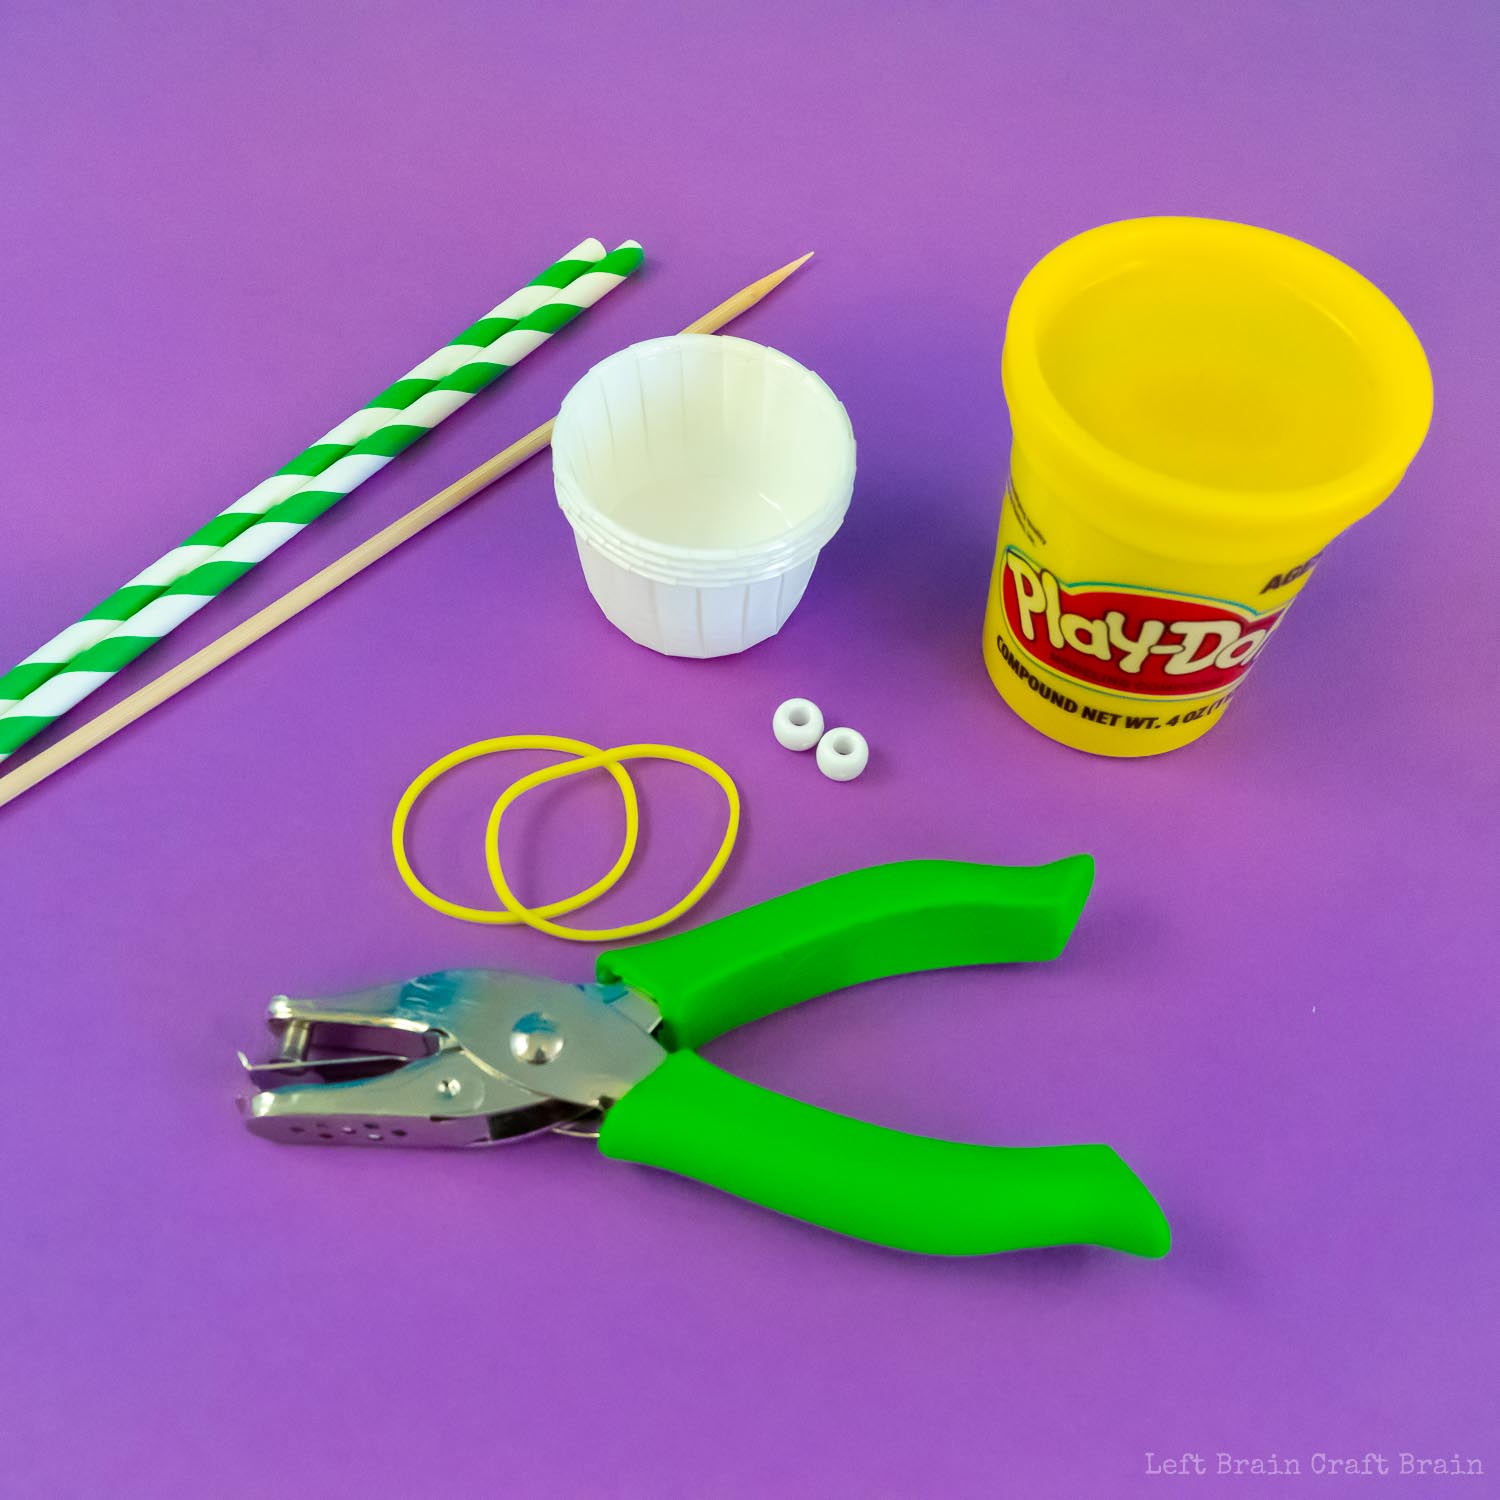 supplies to make paper cup anemometer on purple background (paper straws, bamboo skewer, pony beads, hole punch, rubber bands, paper condiment cups, and playdoh cup)